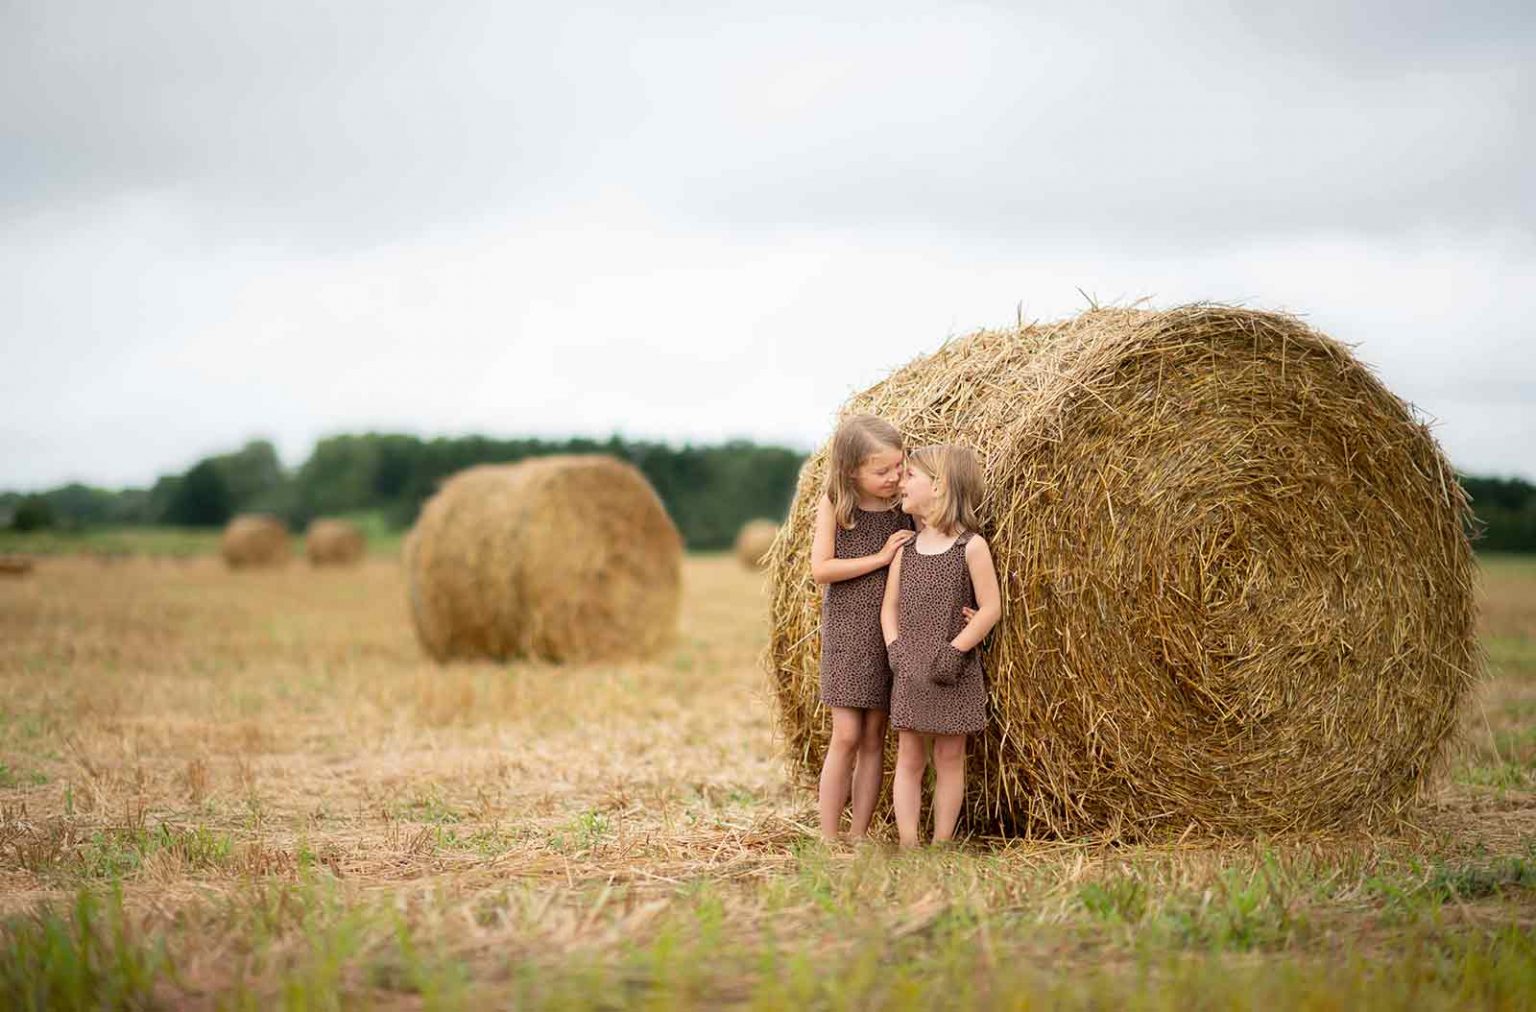 Sisters bonding on a farm in the Hamptons with hay bales in the background